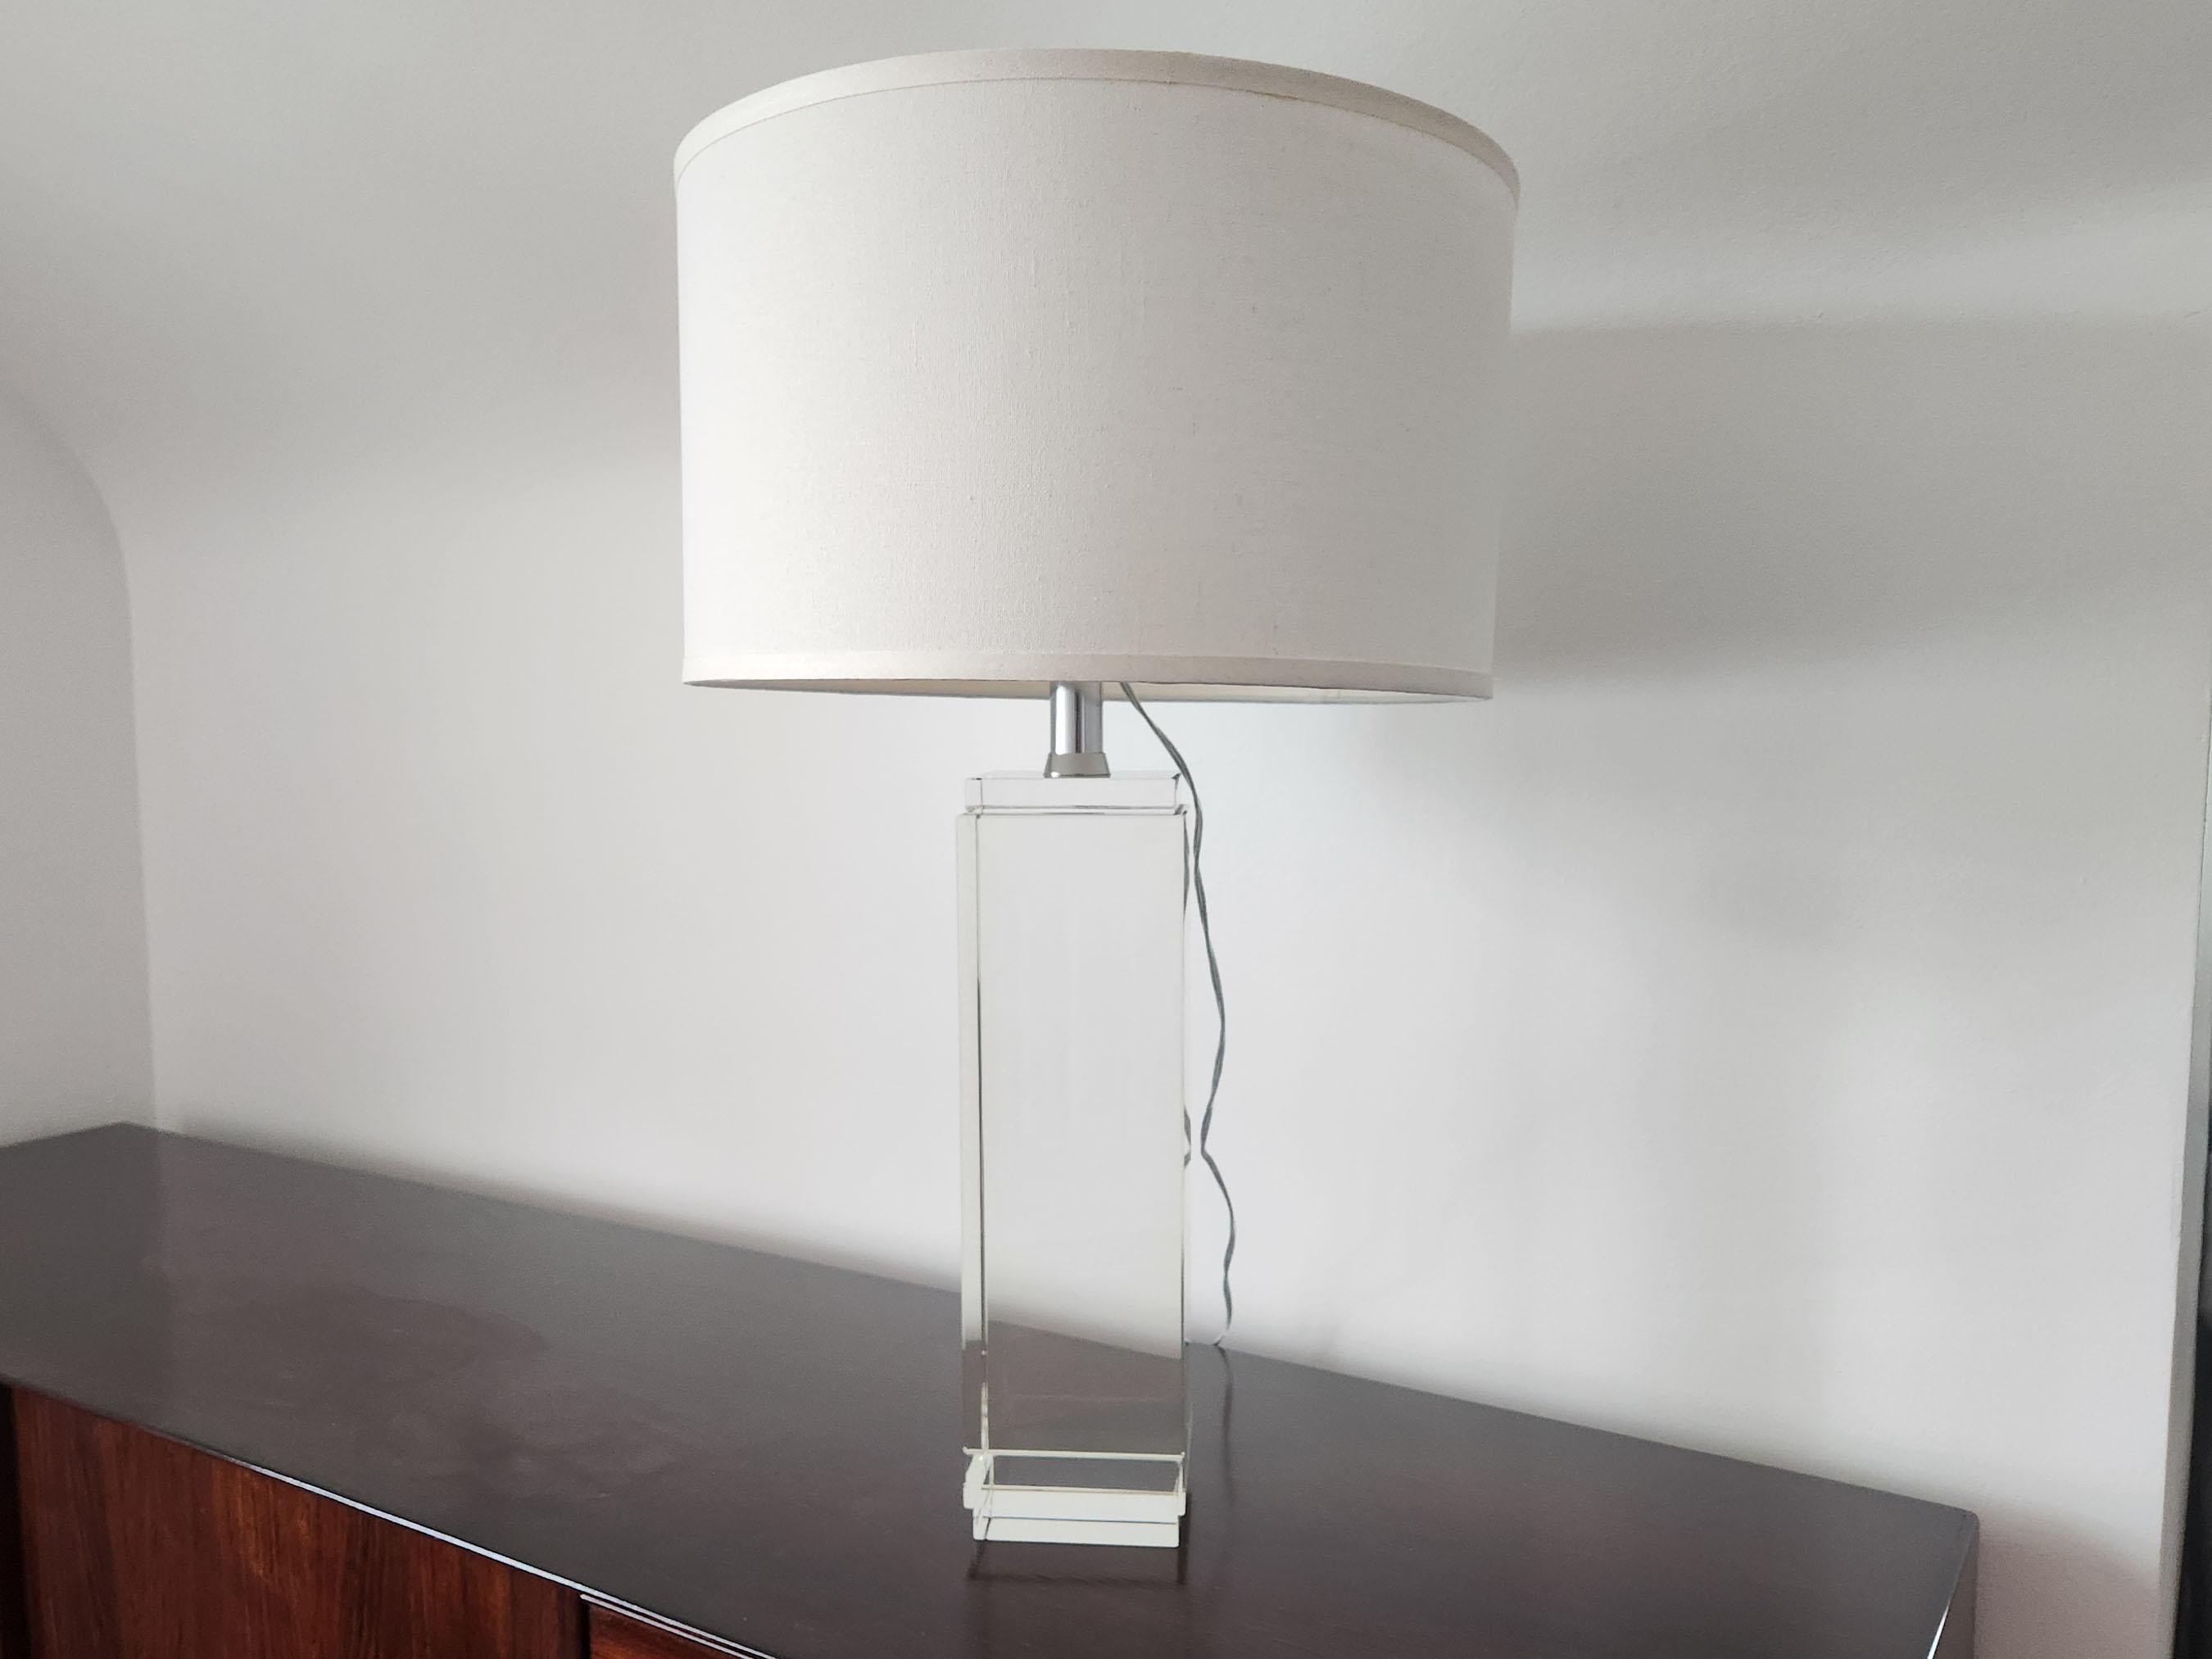 This square column crystal table lamp is modern in its simplicity, so brilliantly compact. The fun geometric shape brings a little life to bedside tables and beyond. The gorgeous crystal base is accented with a reduced foot print.

Bulb Included: 